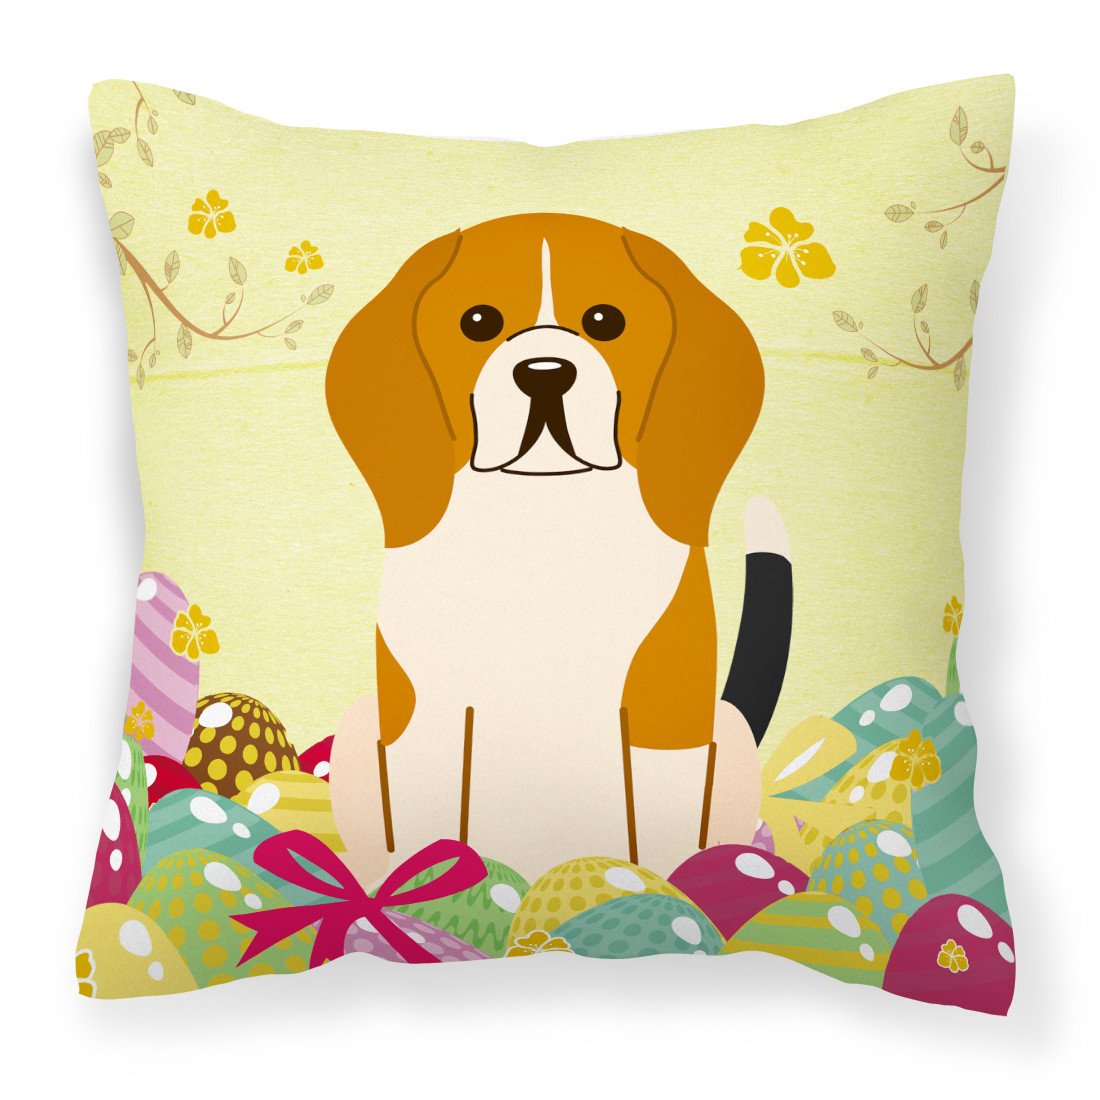 Easter Eggs Beagle Tricolor Fabric Decorative Pillow BB6040PW1818 by Caroline's Treasures